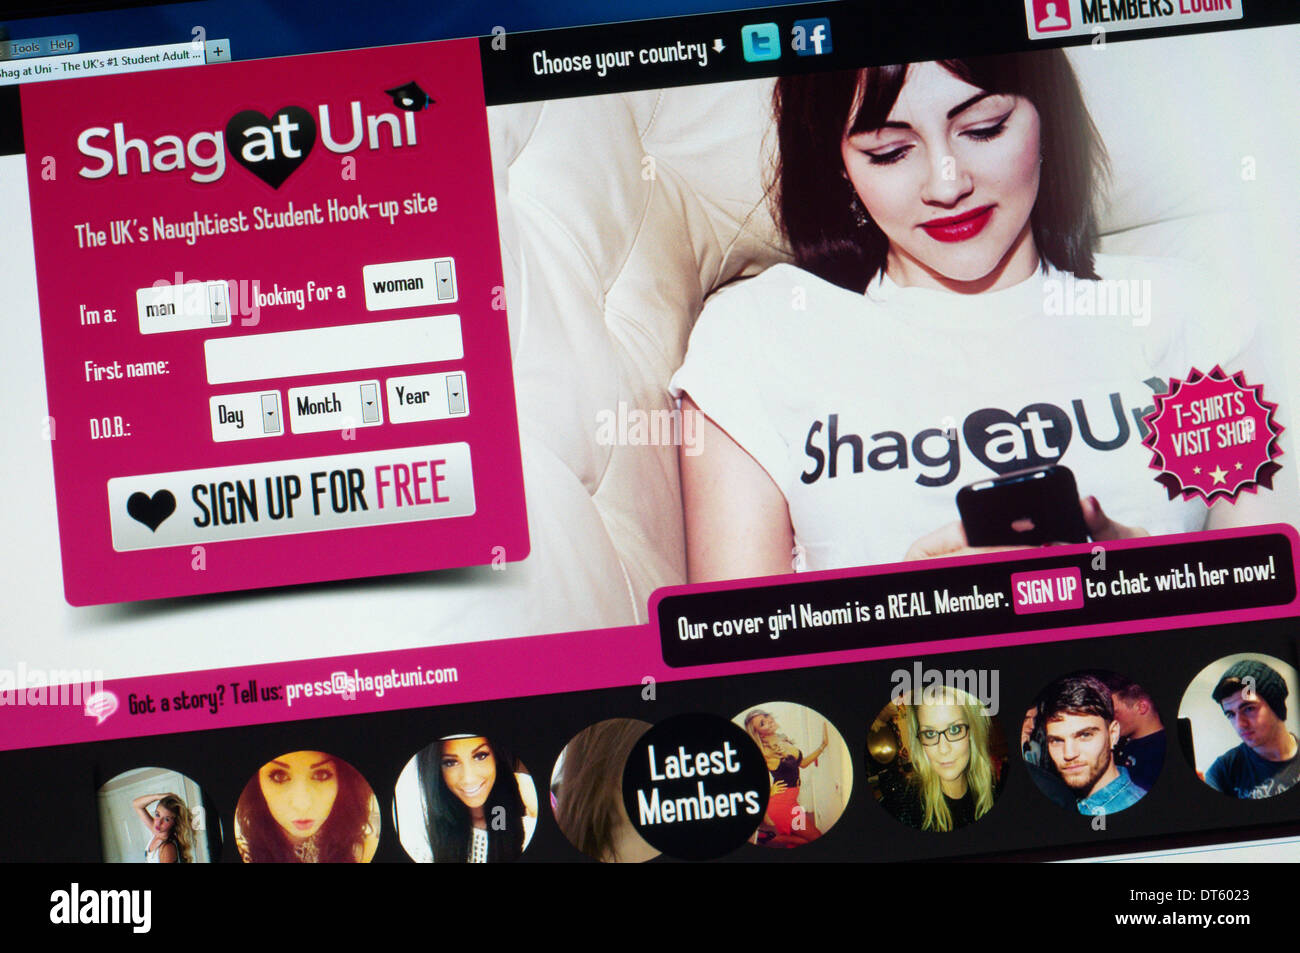 The home page of Shag at Uni, the self-styled 'UK's naughtiest student hook-up site'. Stock Photo